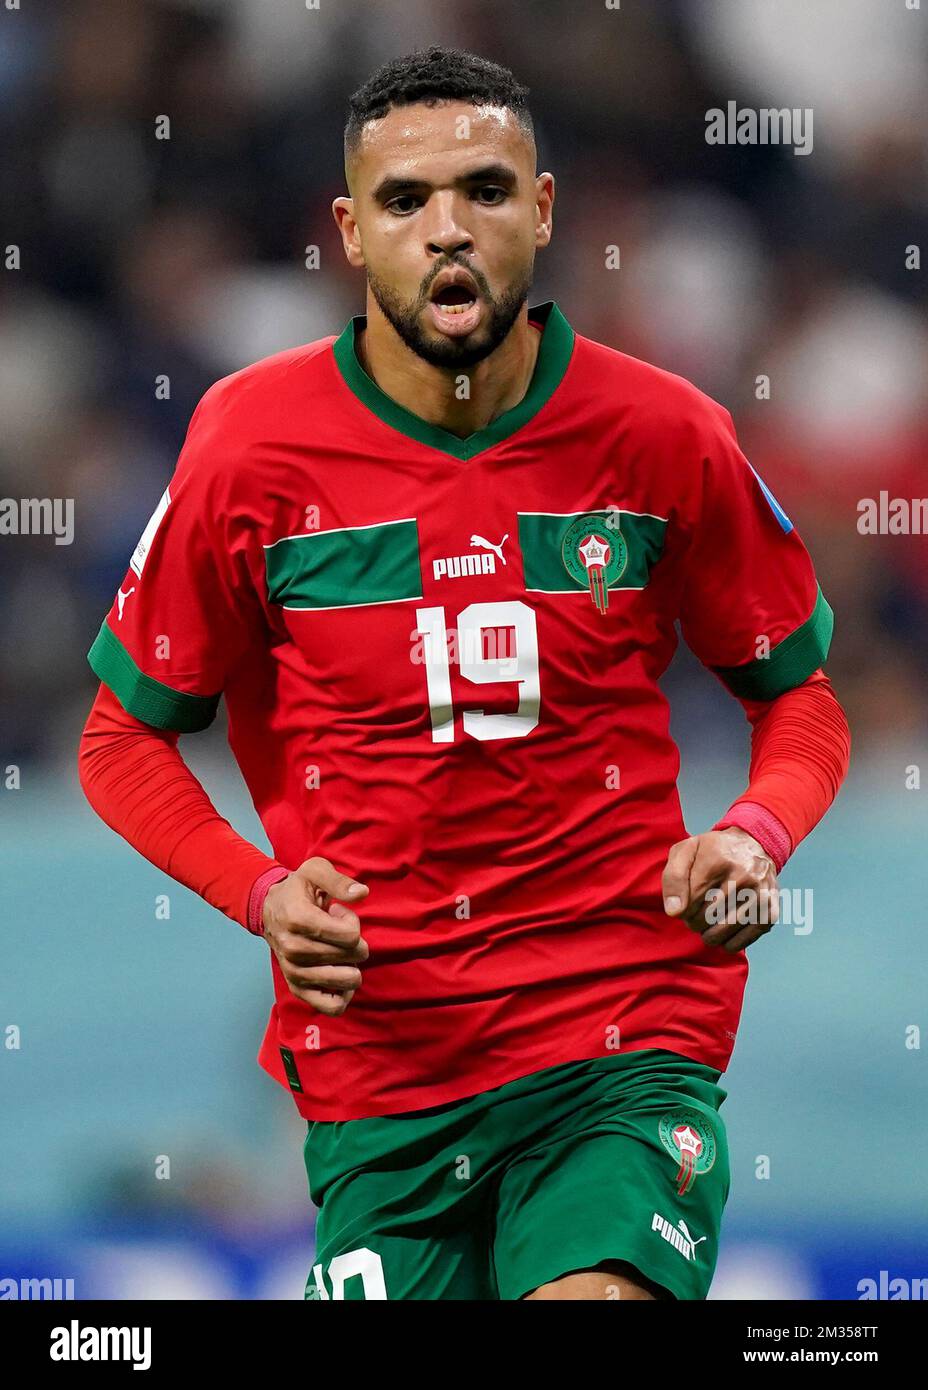 Morocco’s Youssef En-Nesyri during the FIFA World Cup Semi-Final match at the Al Bayt Stadium in Al Khor, Qatar. Picture date: Wednesday December 14, 2022. Stock Photo